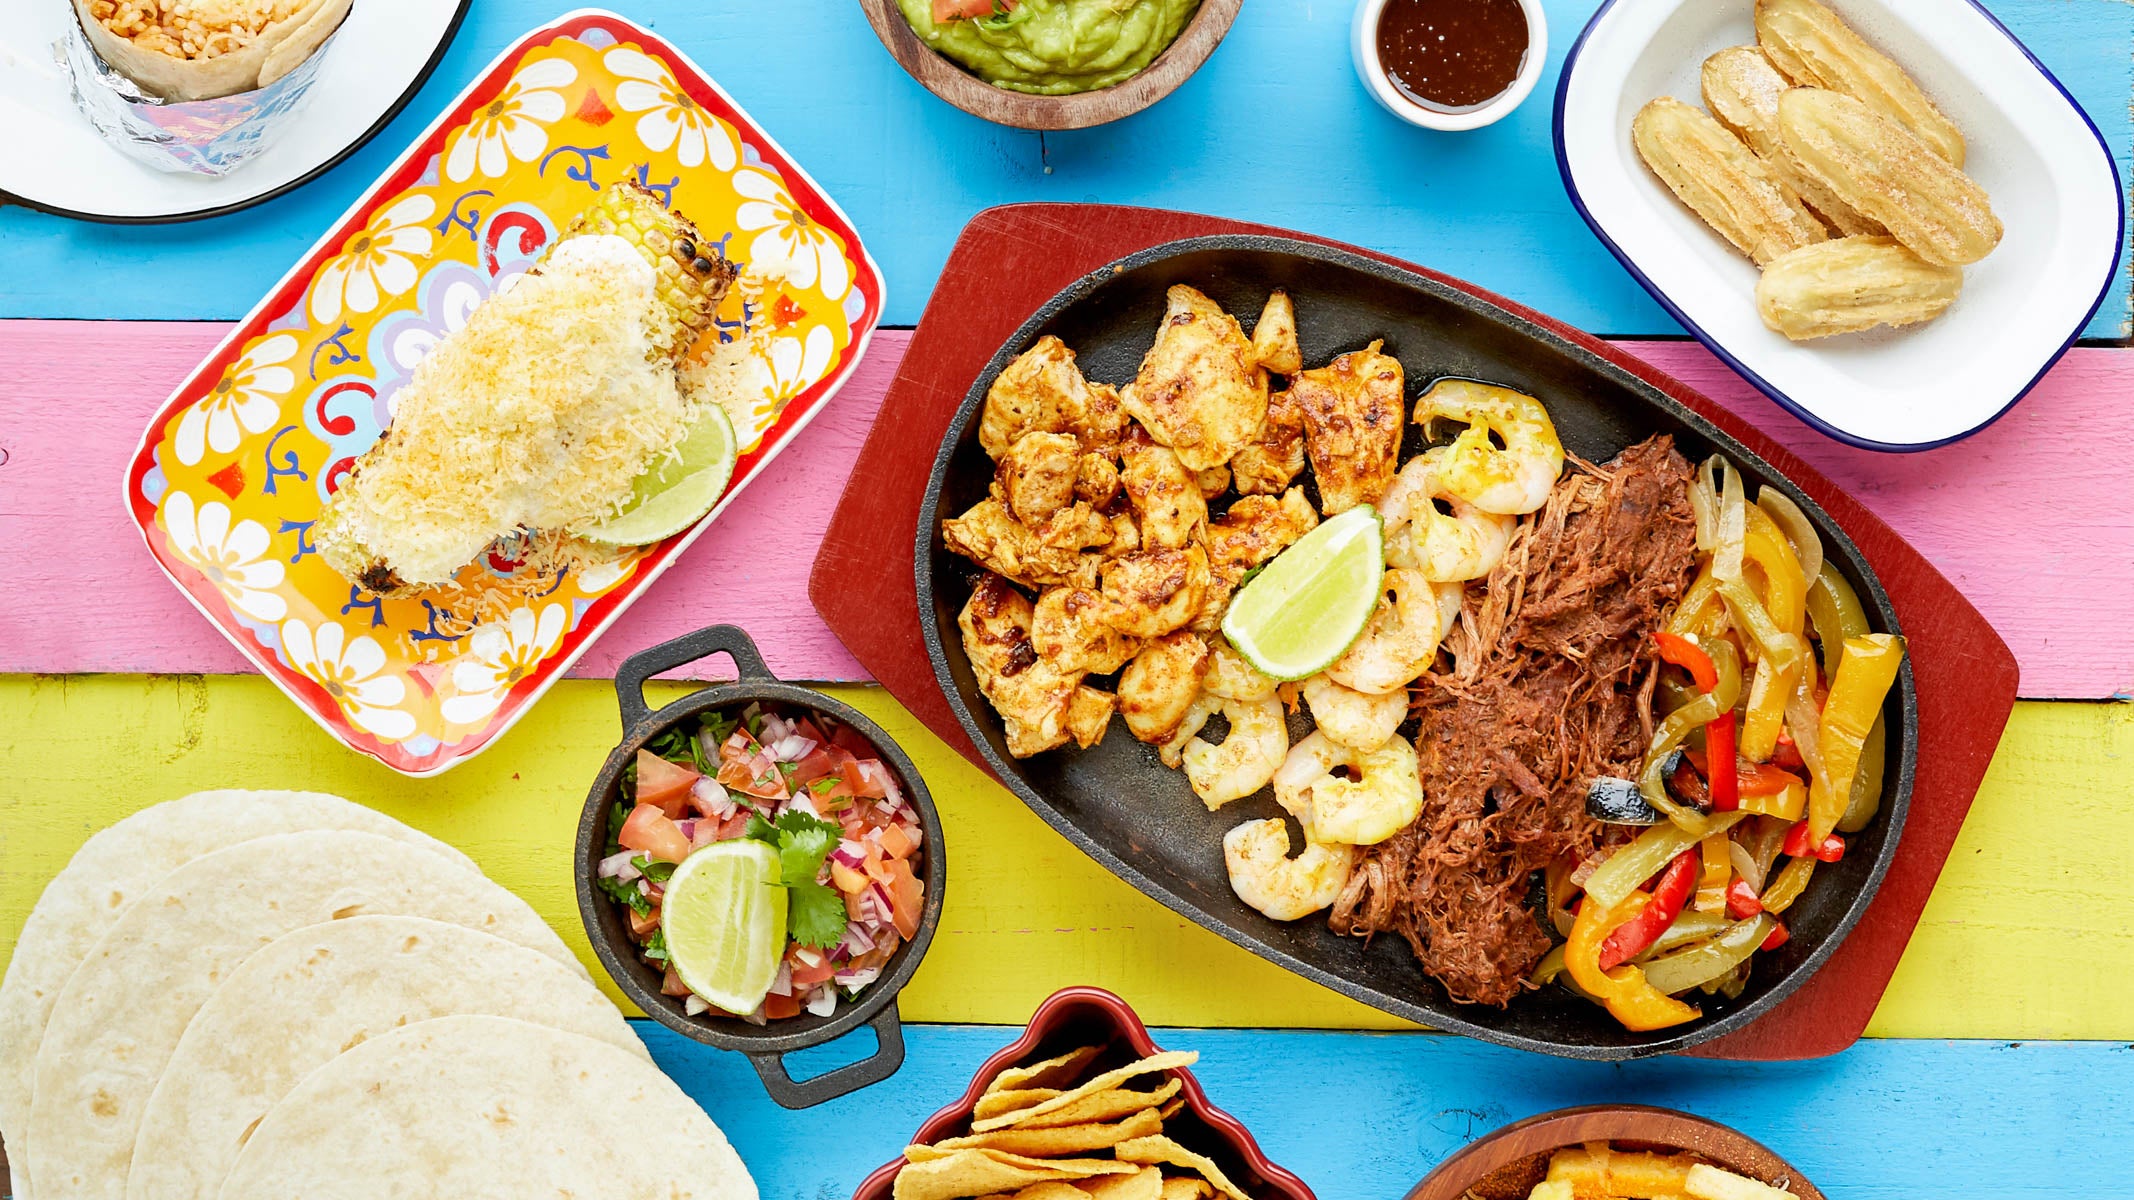 Restaurant Arriba Arriba - Chiswick in South Acton - Delivery - Restaurant near me